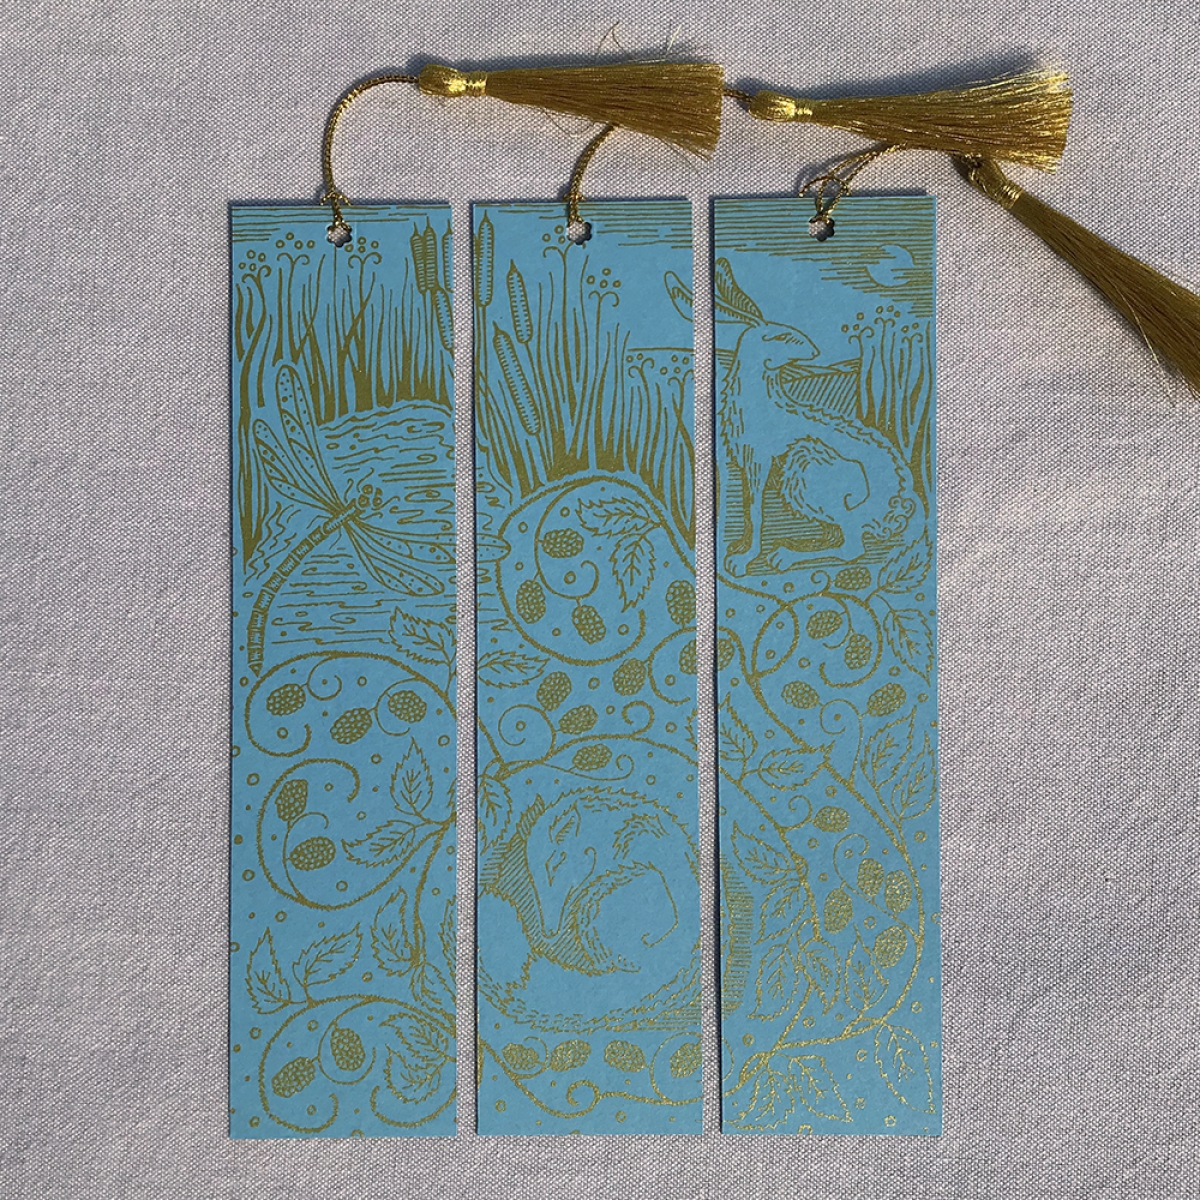 Nature Intertwined Hand Printed Triptych Bookmarks Sky Blue Gold